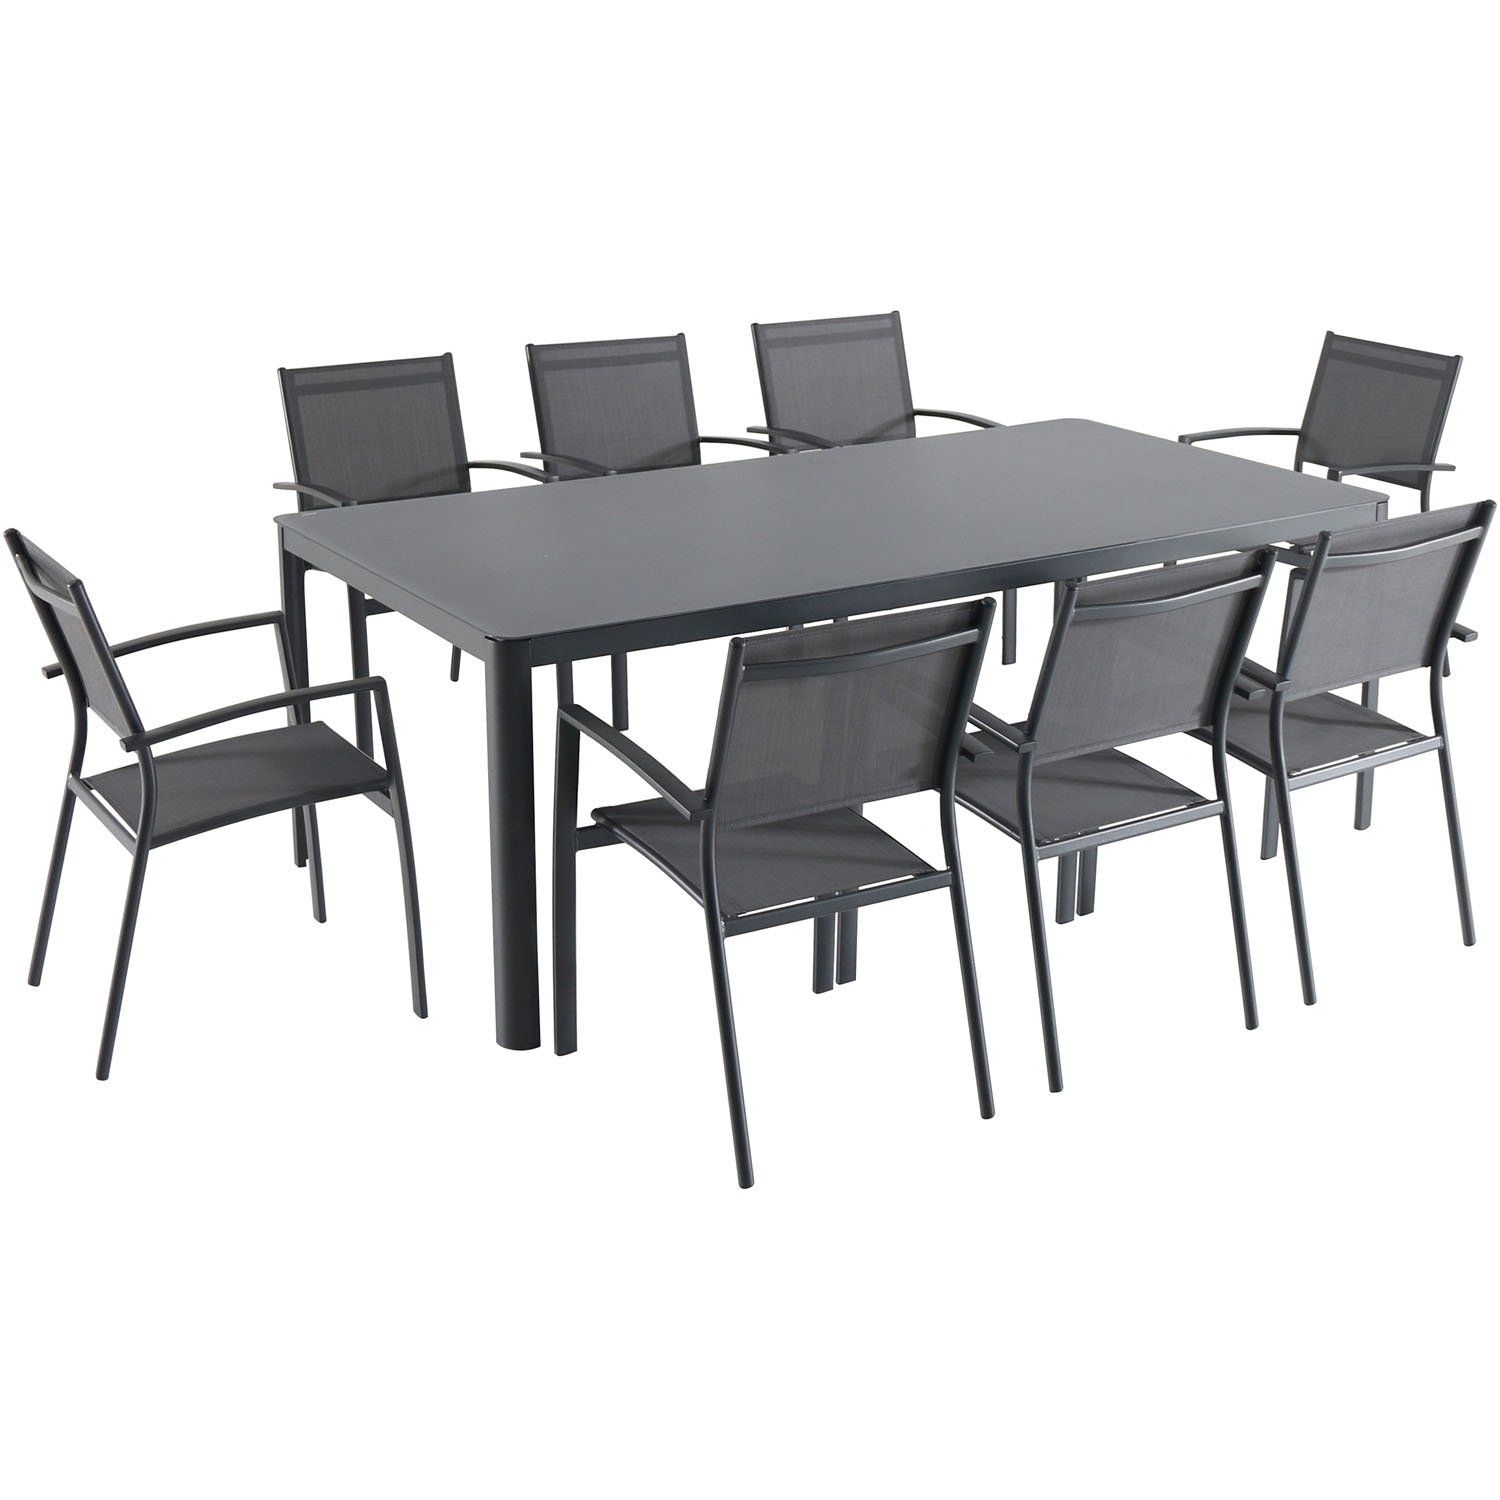 Shop Hanover Fresno 9 Piece Outdoor Dining Set With 8 Sling Arm Regarding Most Recently Released Grady 5 Piece Round Dining Sets (View 8 of 20)